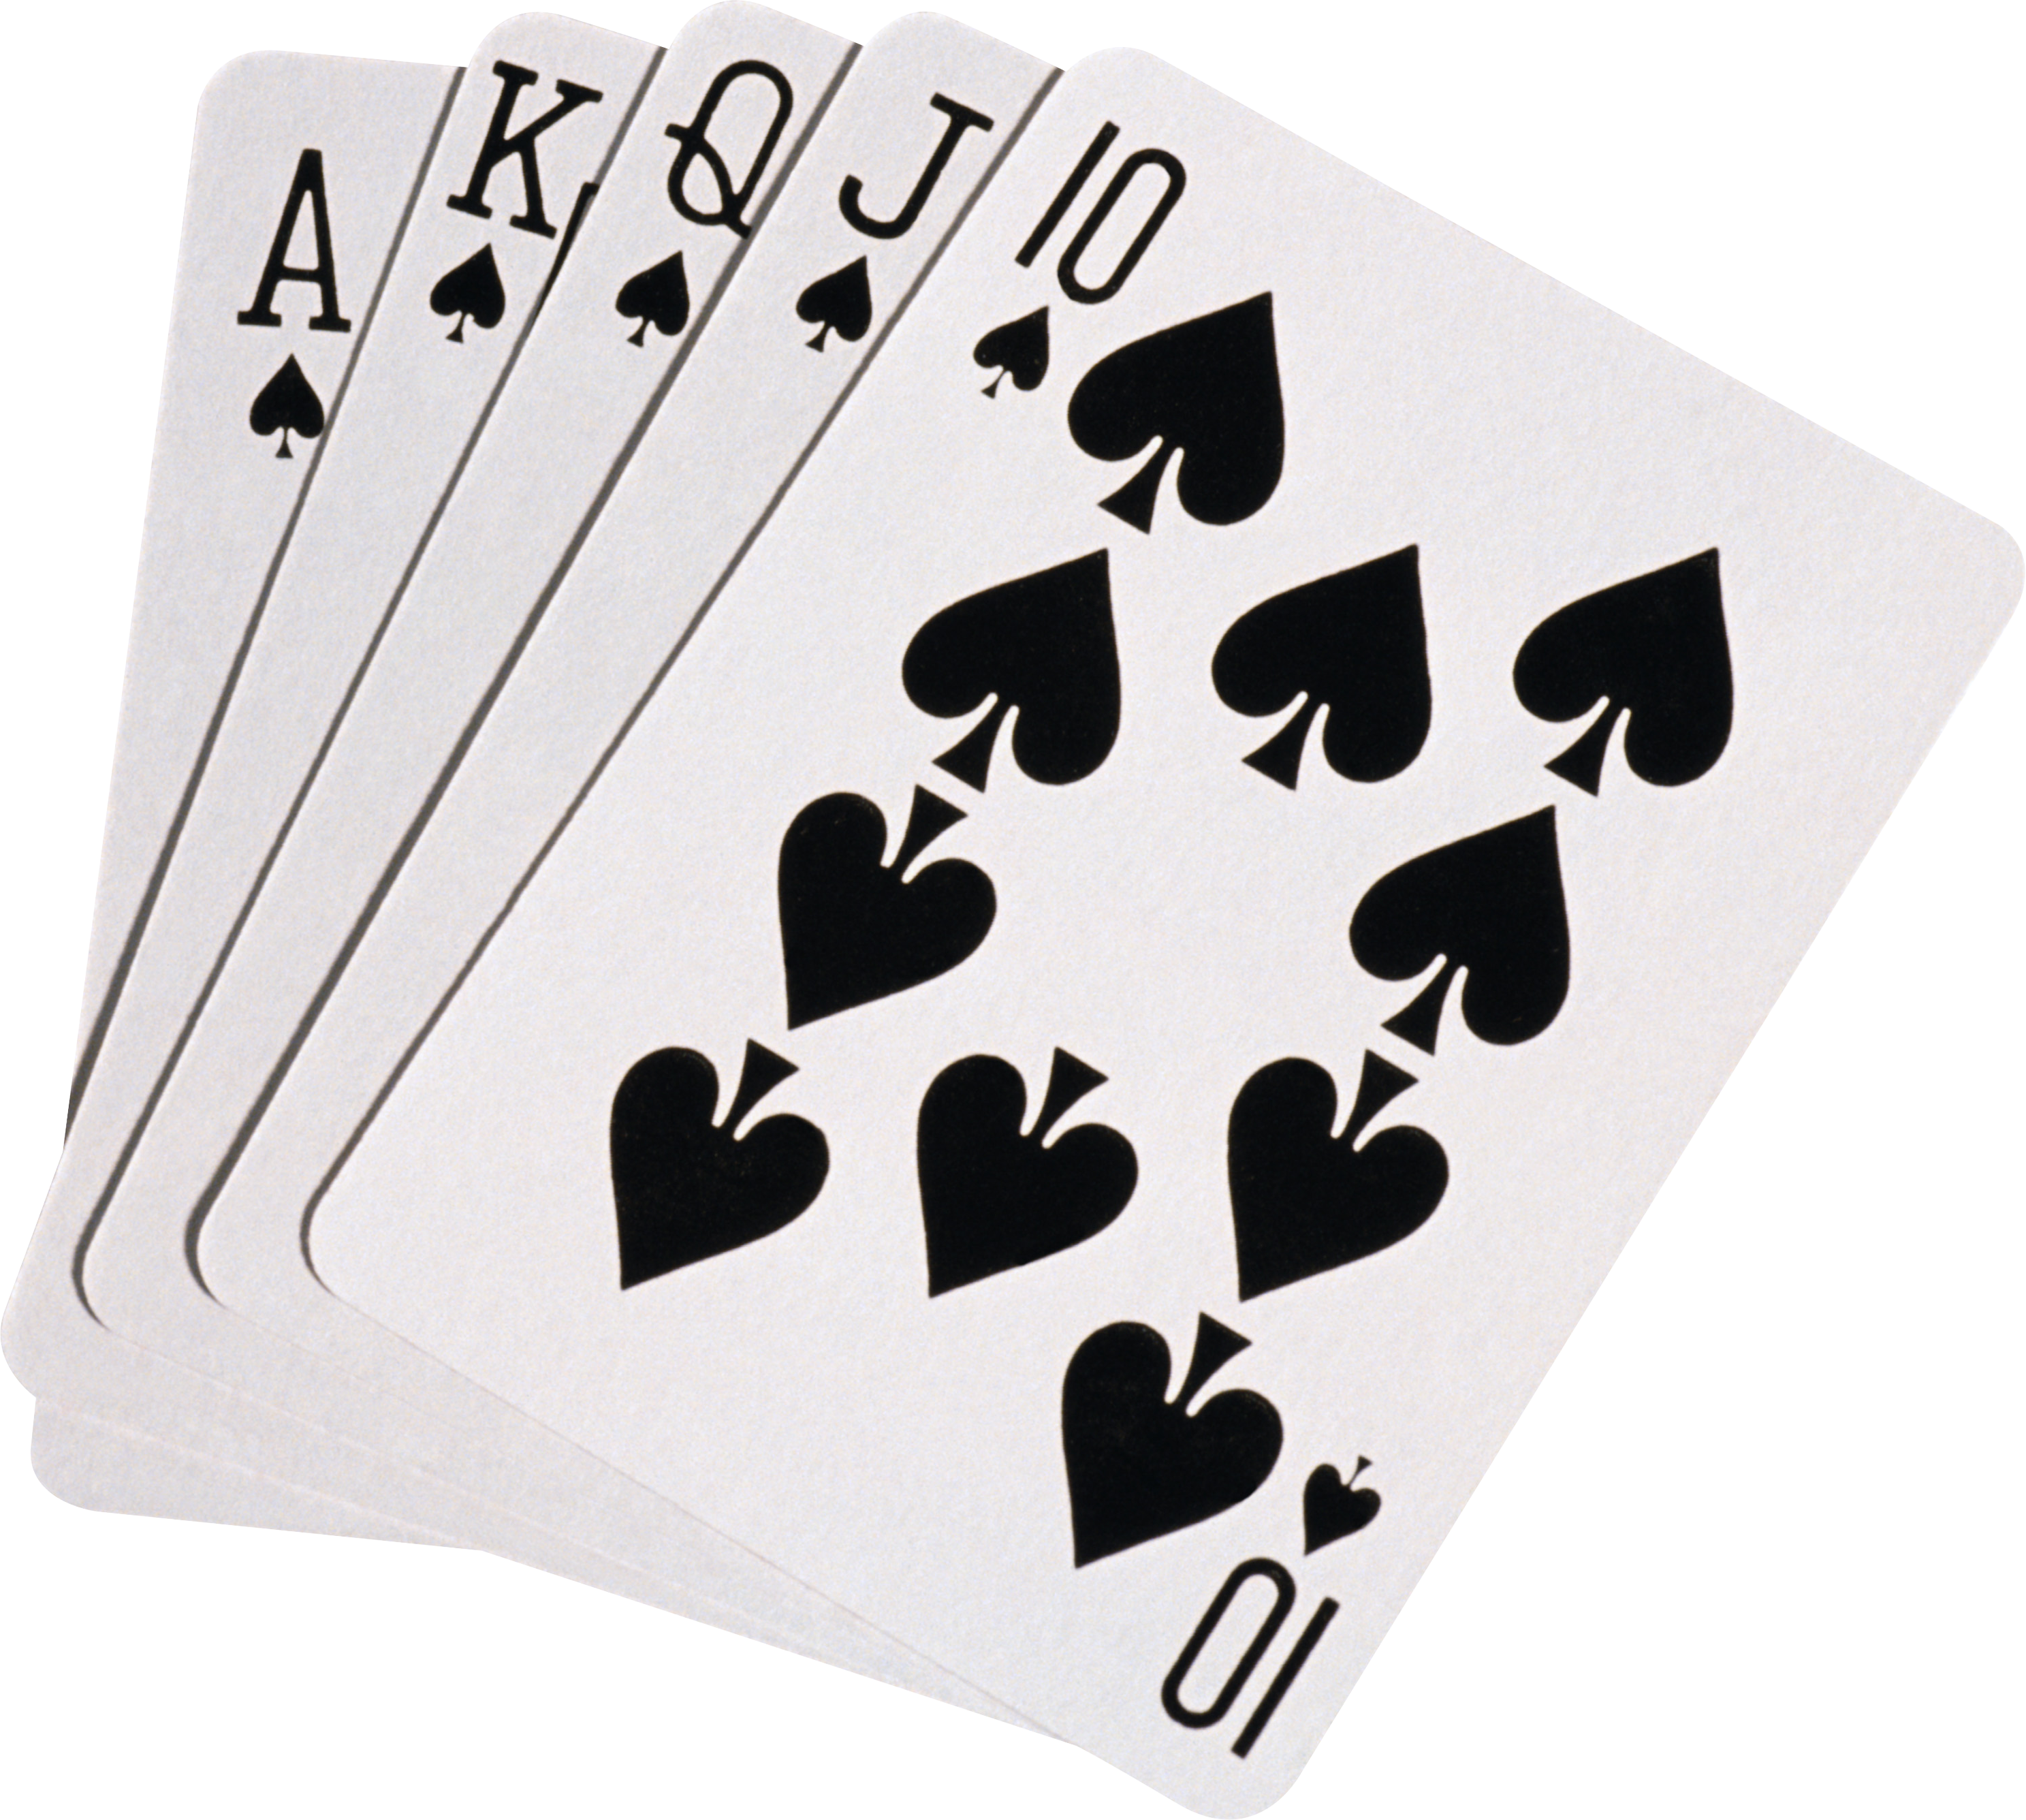 clip art pictures of playing cards - photo #32